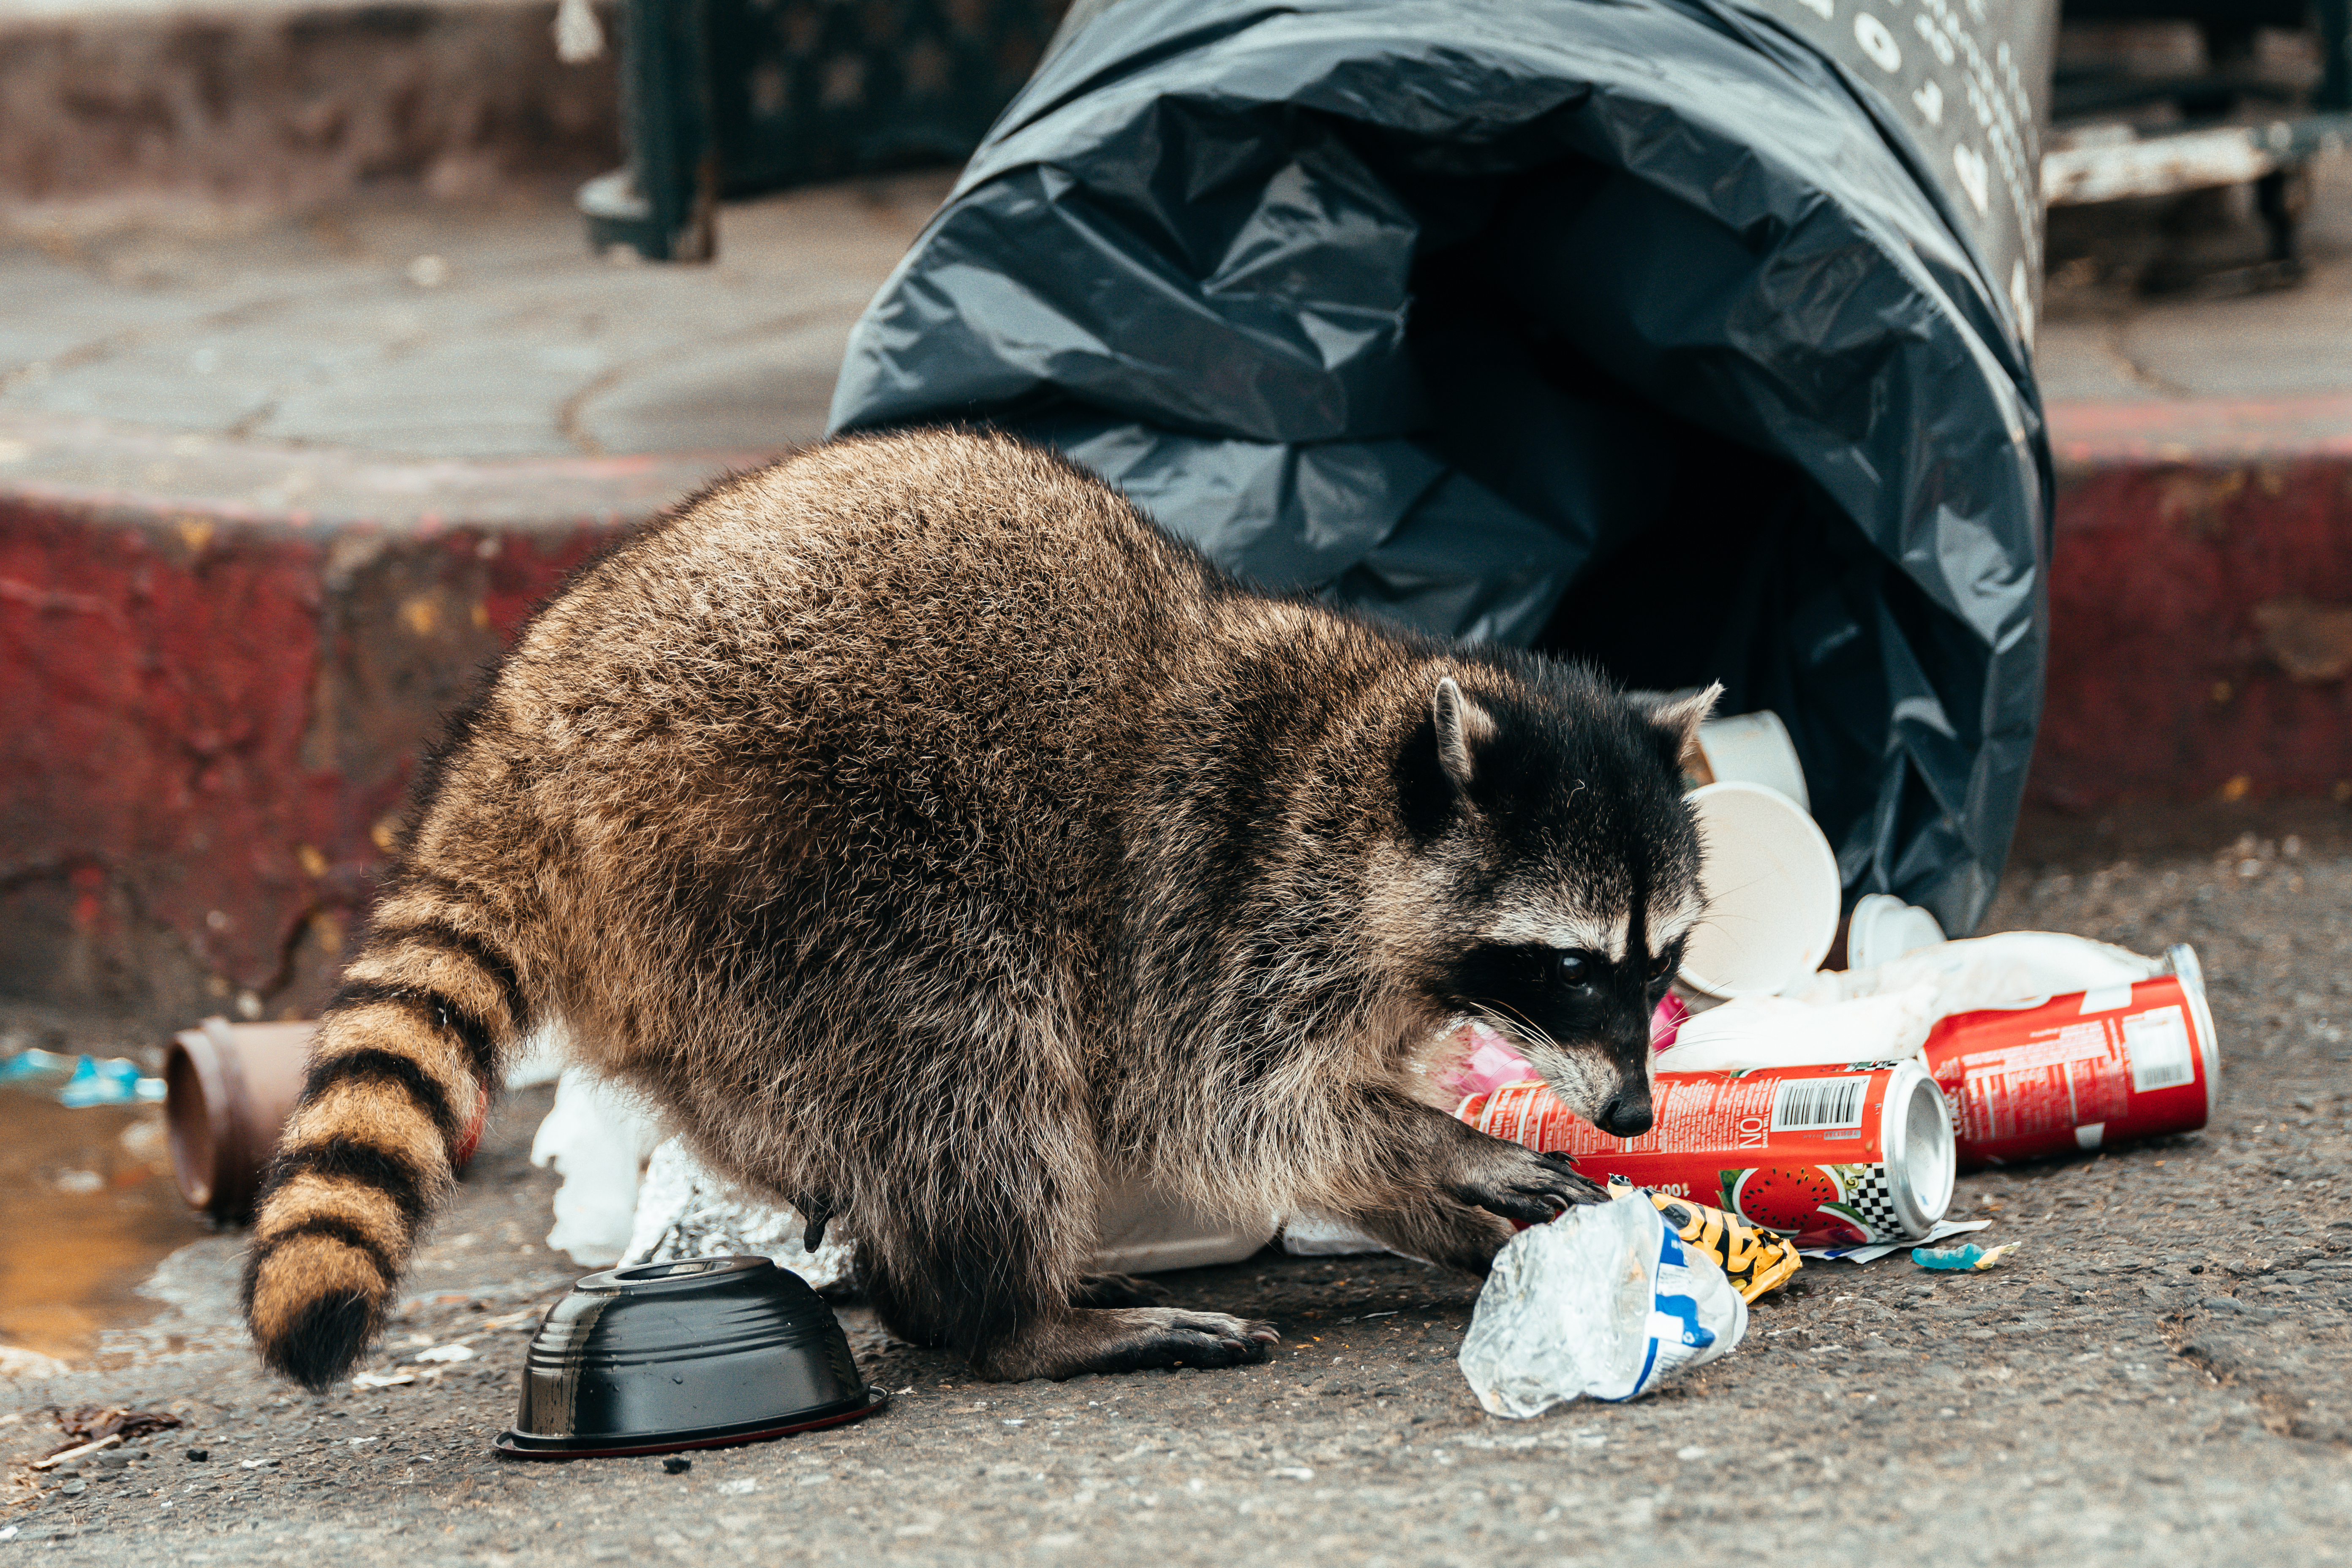 A raccoon rummaging in a trash can - if you are in need of residential wildlife control in St. George, UT this fall, contact Thorn.